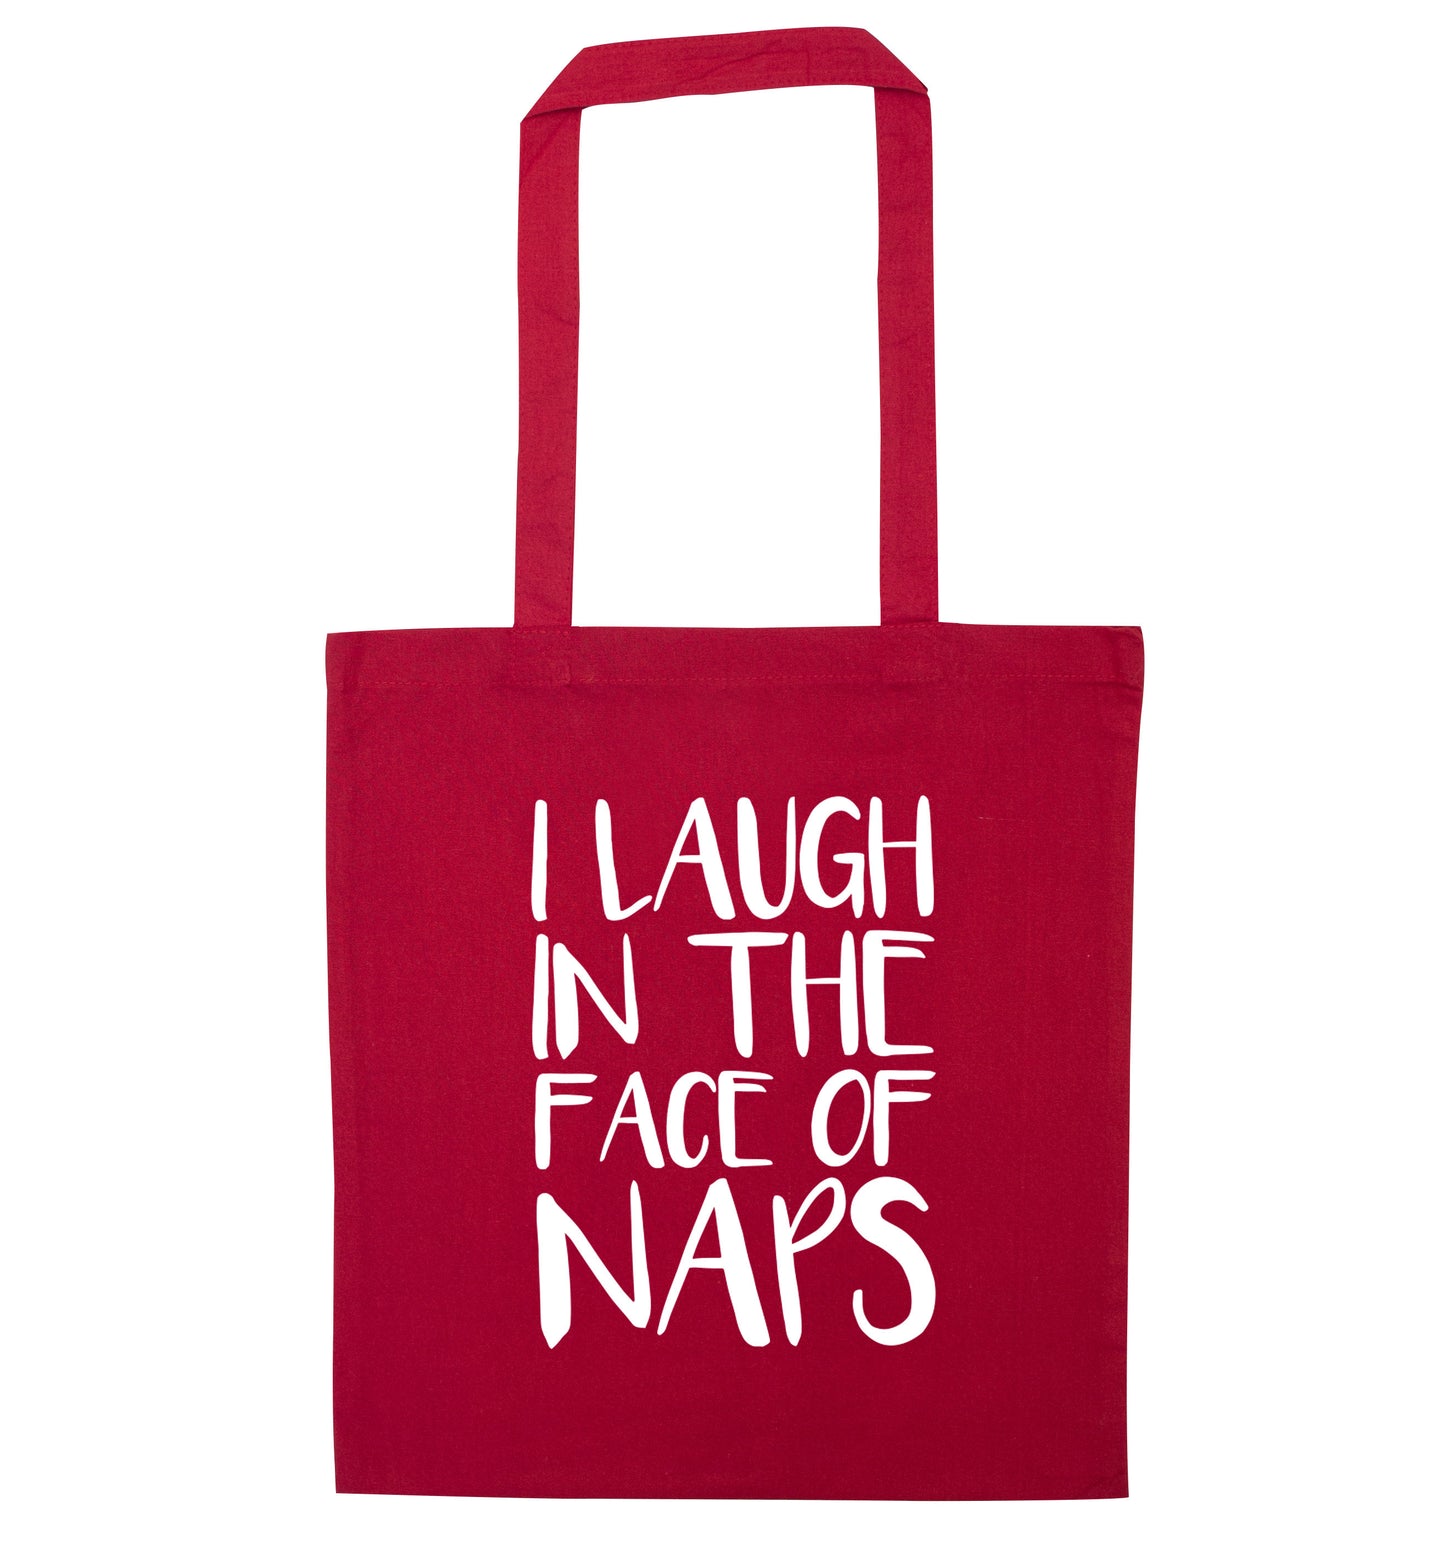 I laugh in the face of naps red tote bag